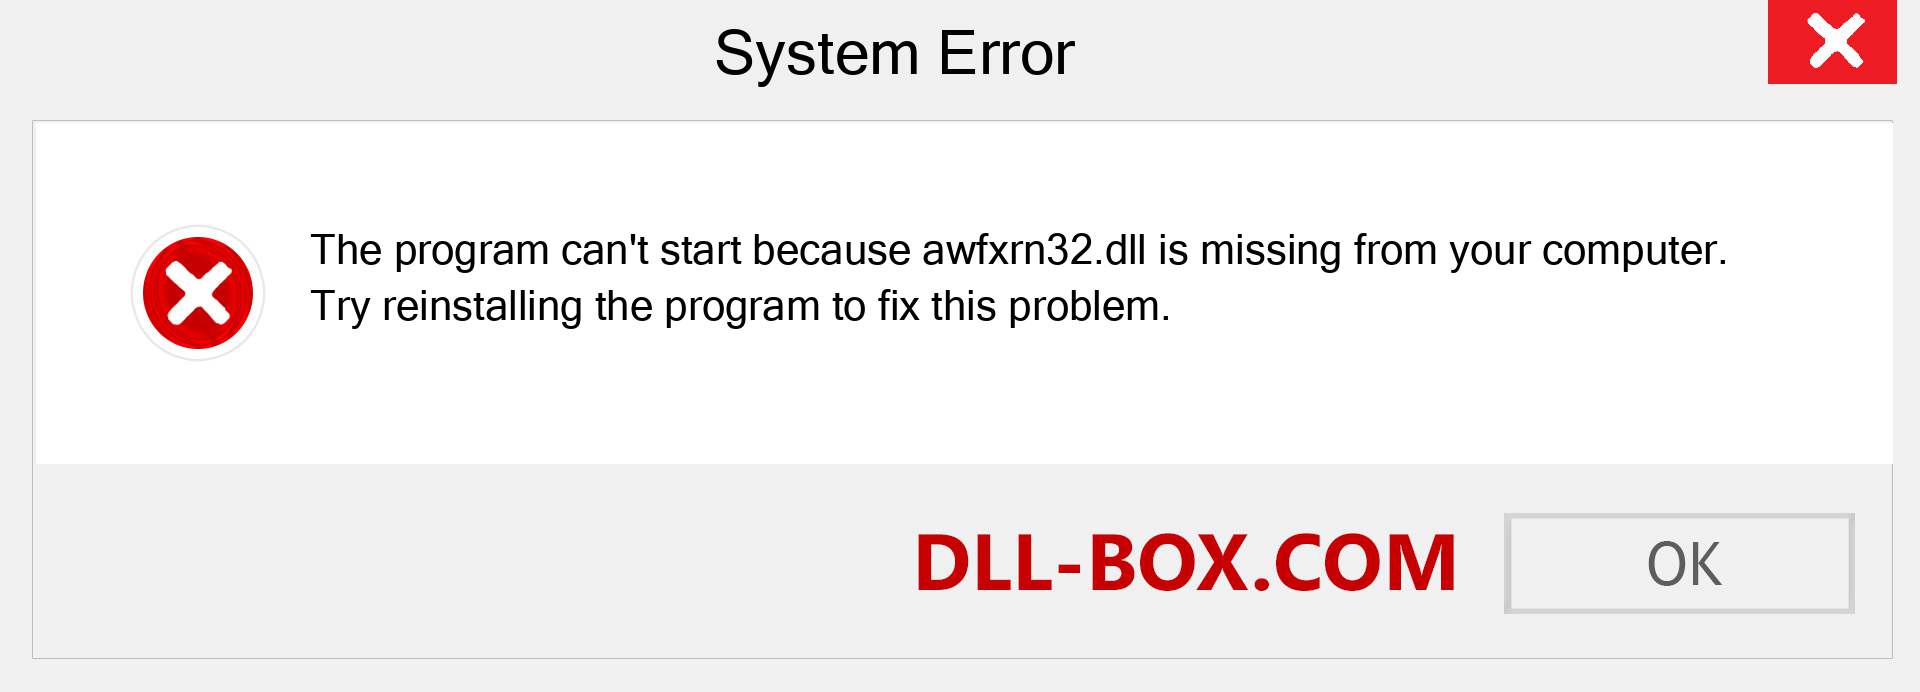  awfxrn32.dll file is missing?. Download for Windows 7, 8, 10 - Fix  awfxrn32 dll Missing Error on Windows, photos, images